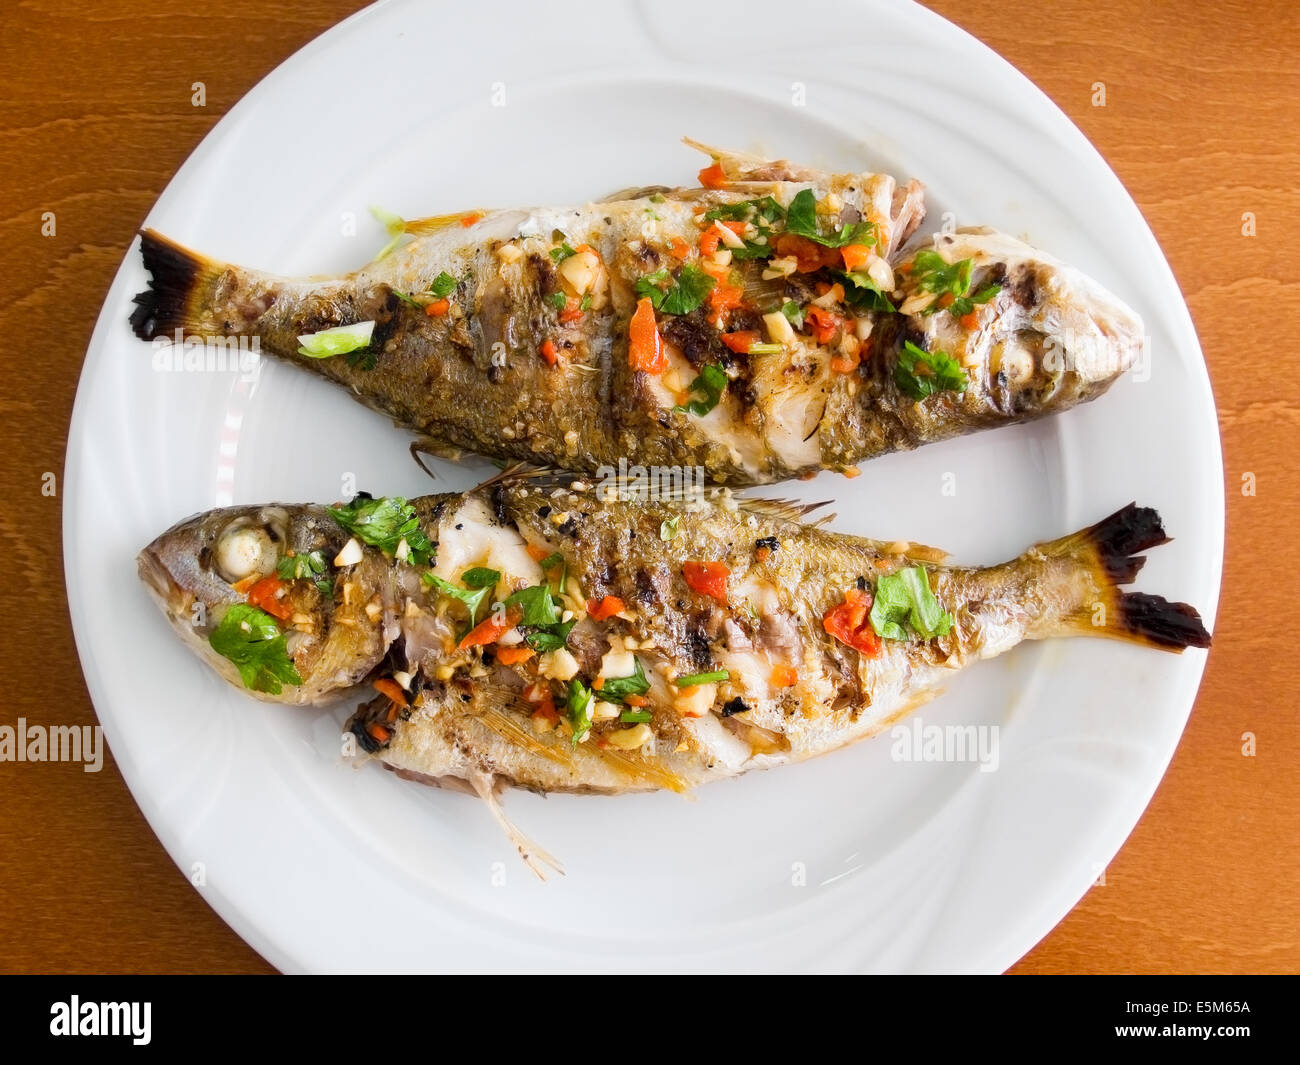 Breams grilled with seasoning. Typical mediterranean dish. Stock Photo